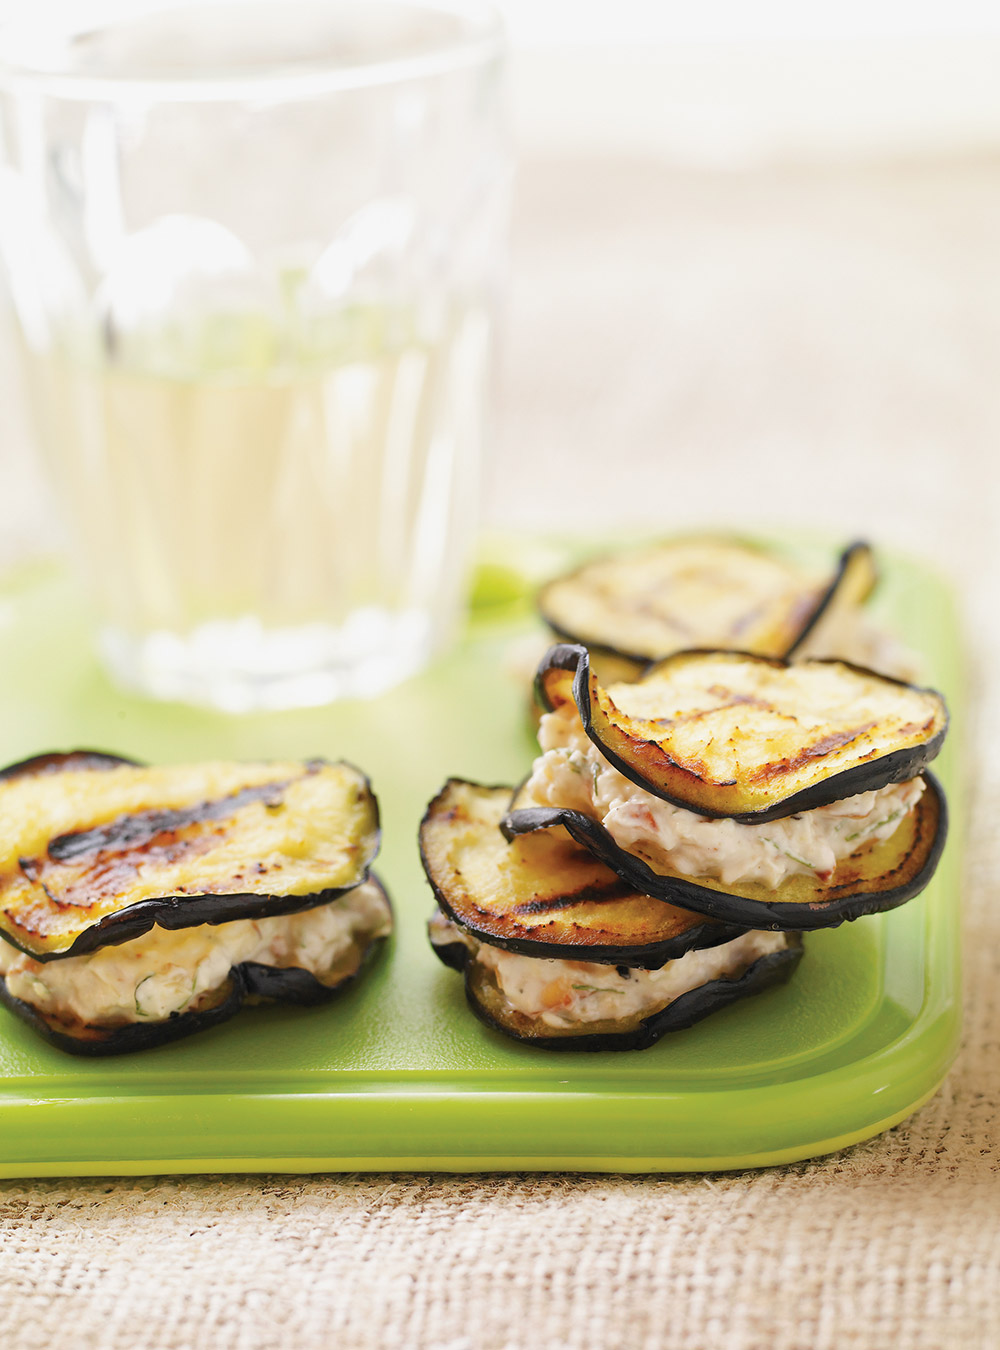 Grilled Eggplant Bites with Yogurt and Nuts